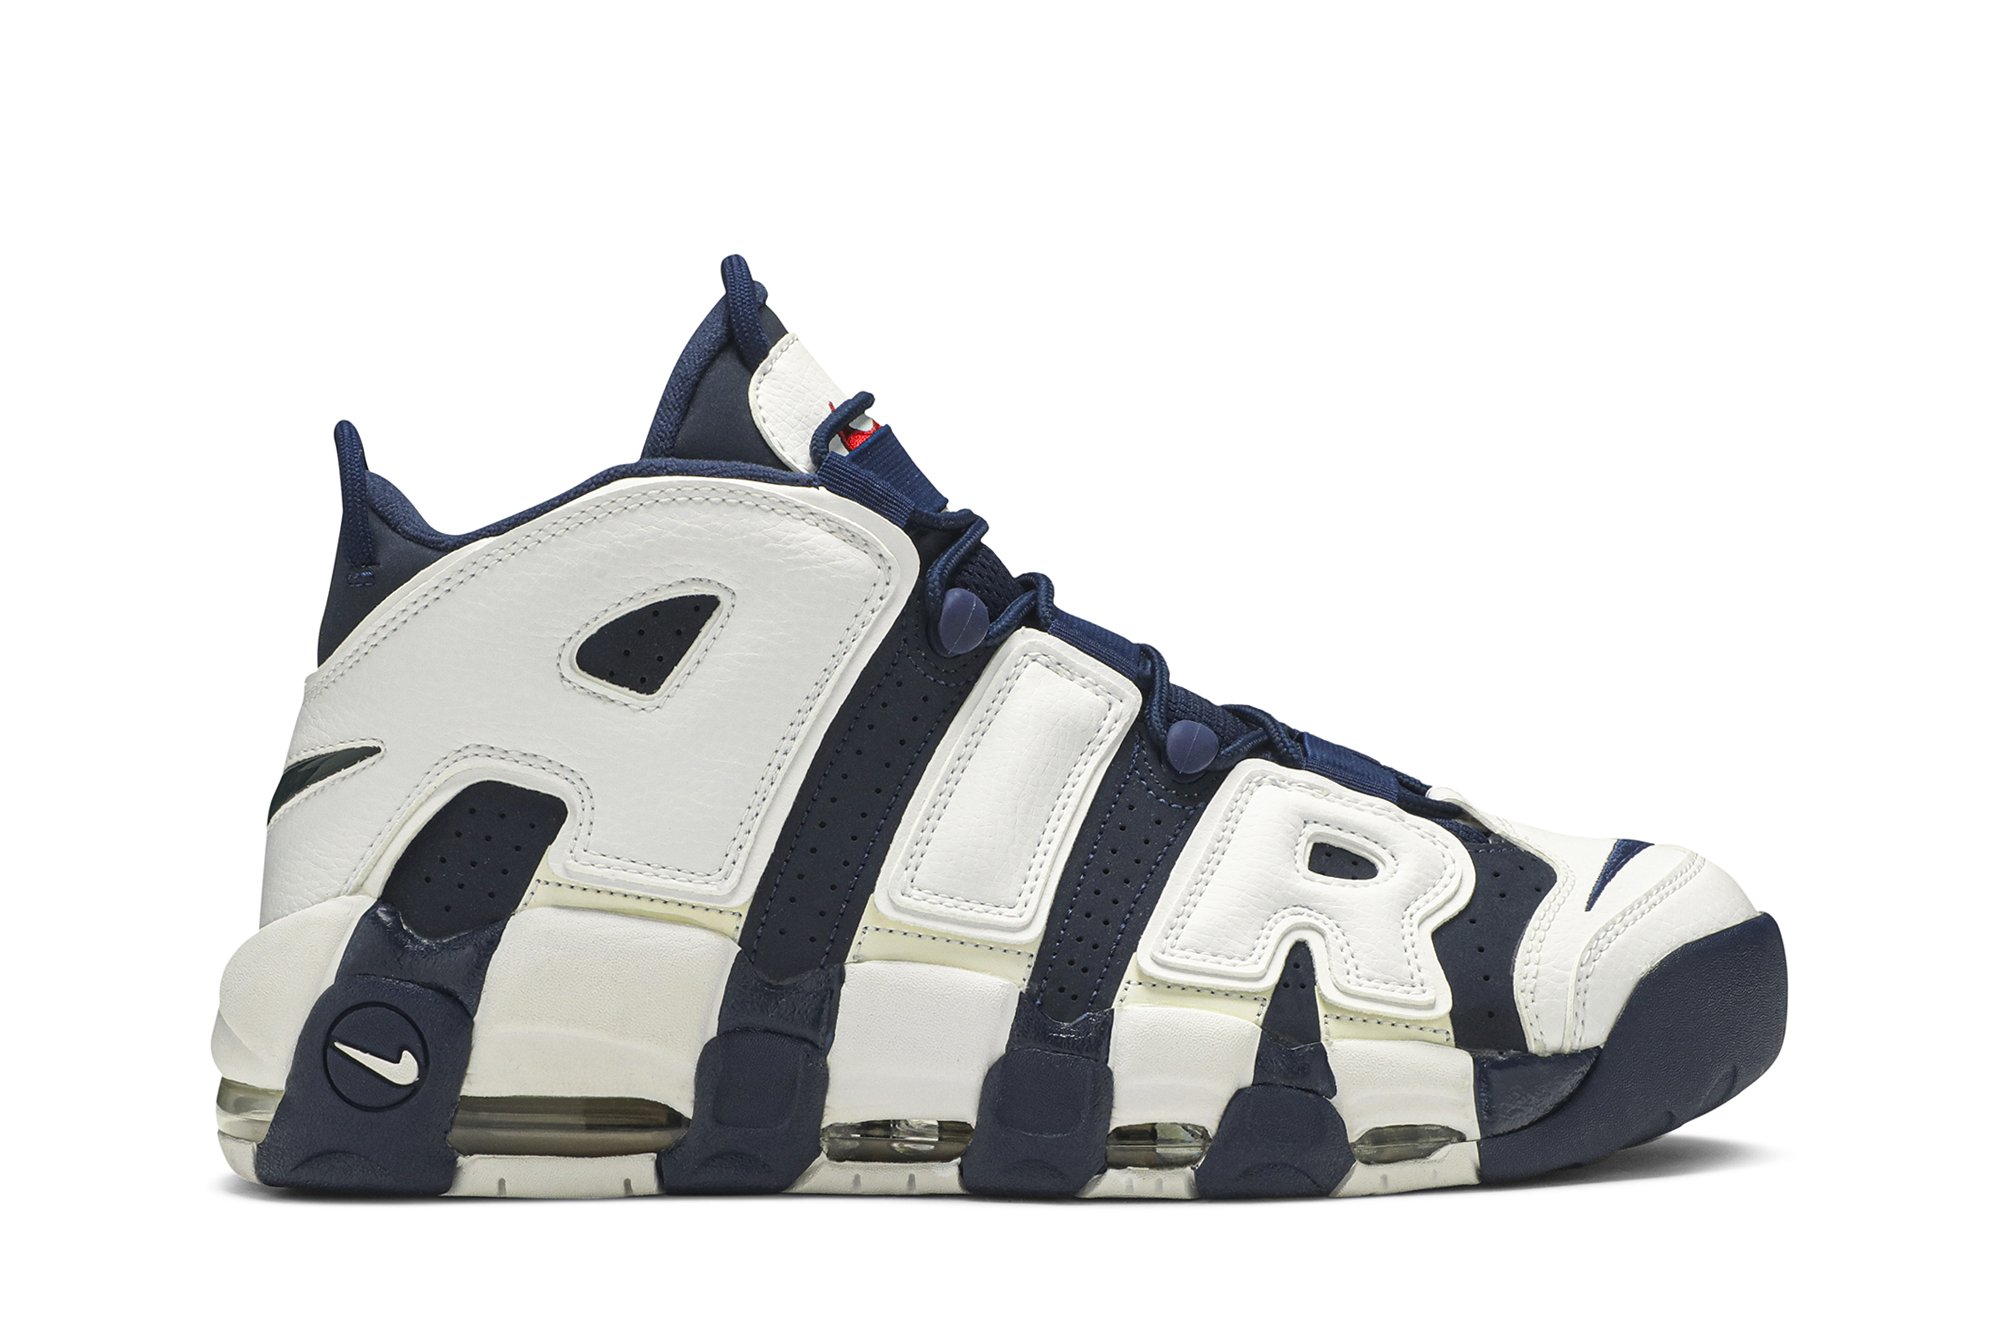 Nike Air More Uptempo “Olympic 2012”